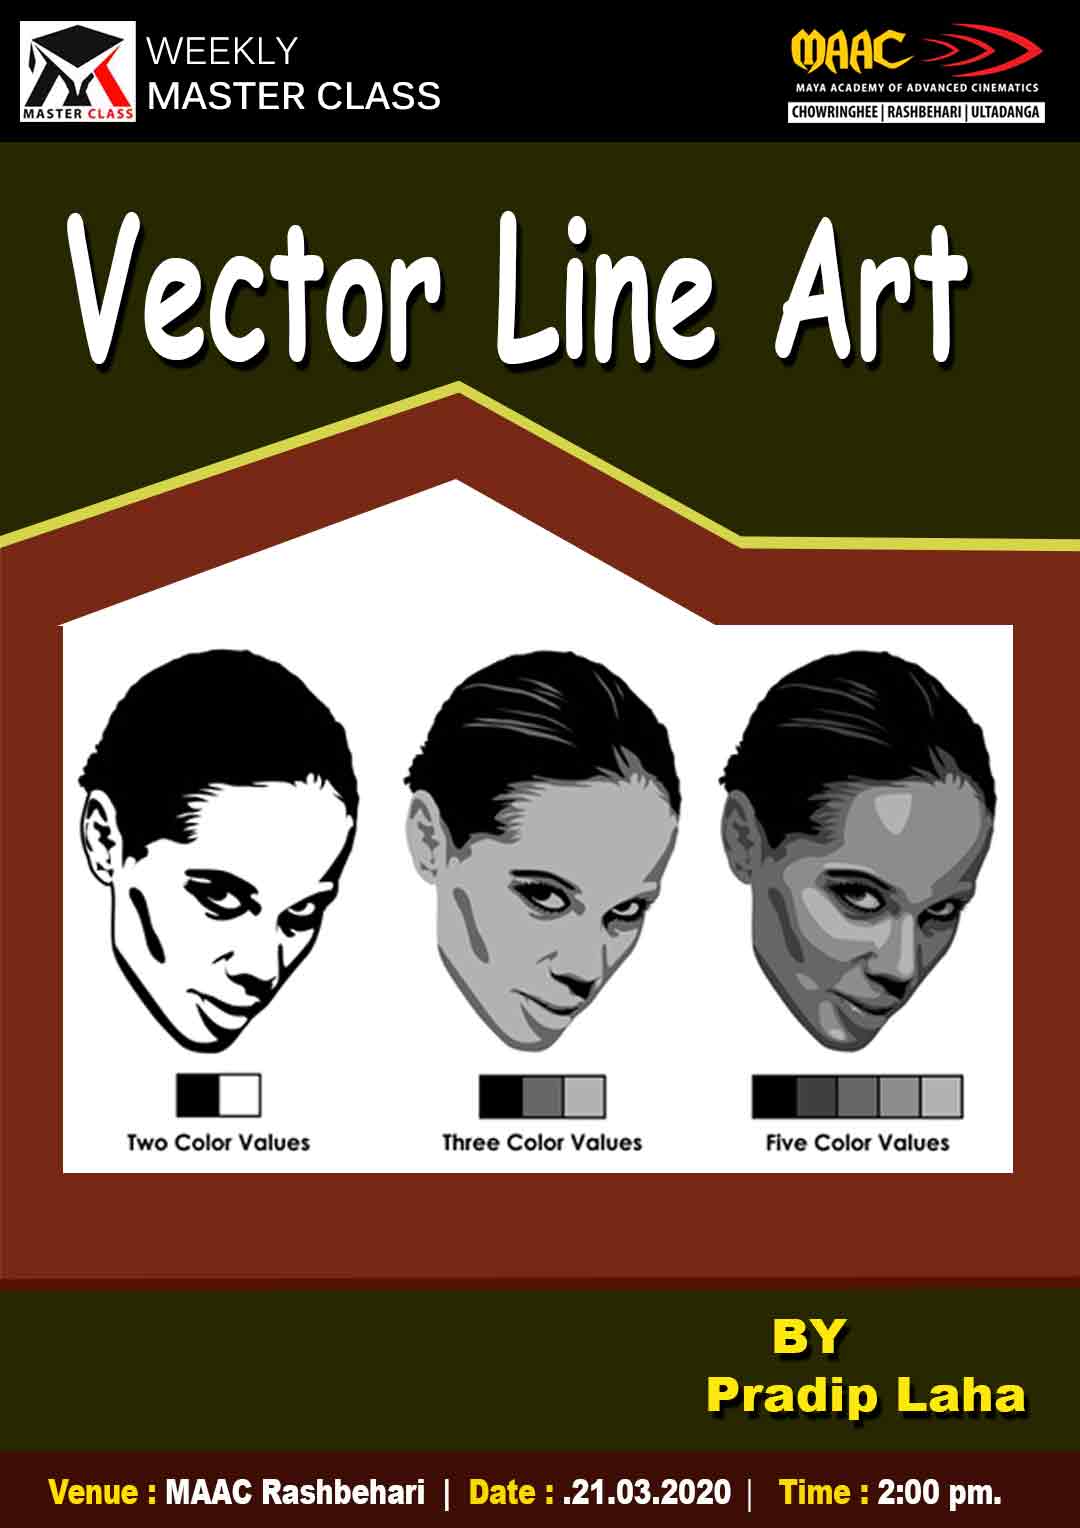 Weekly Master Class on Vector Line Art